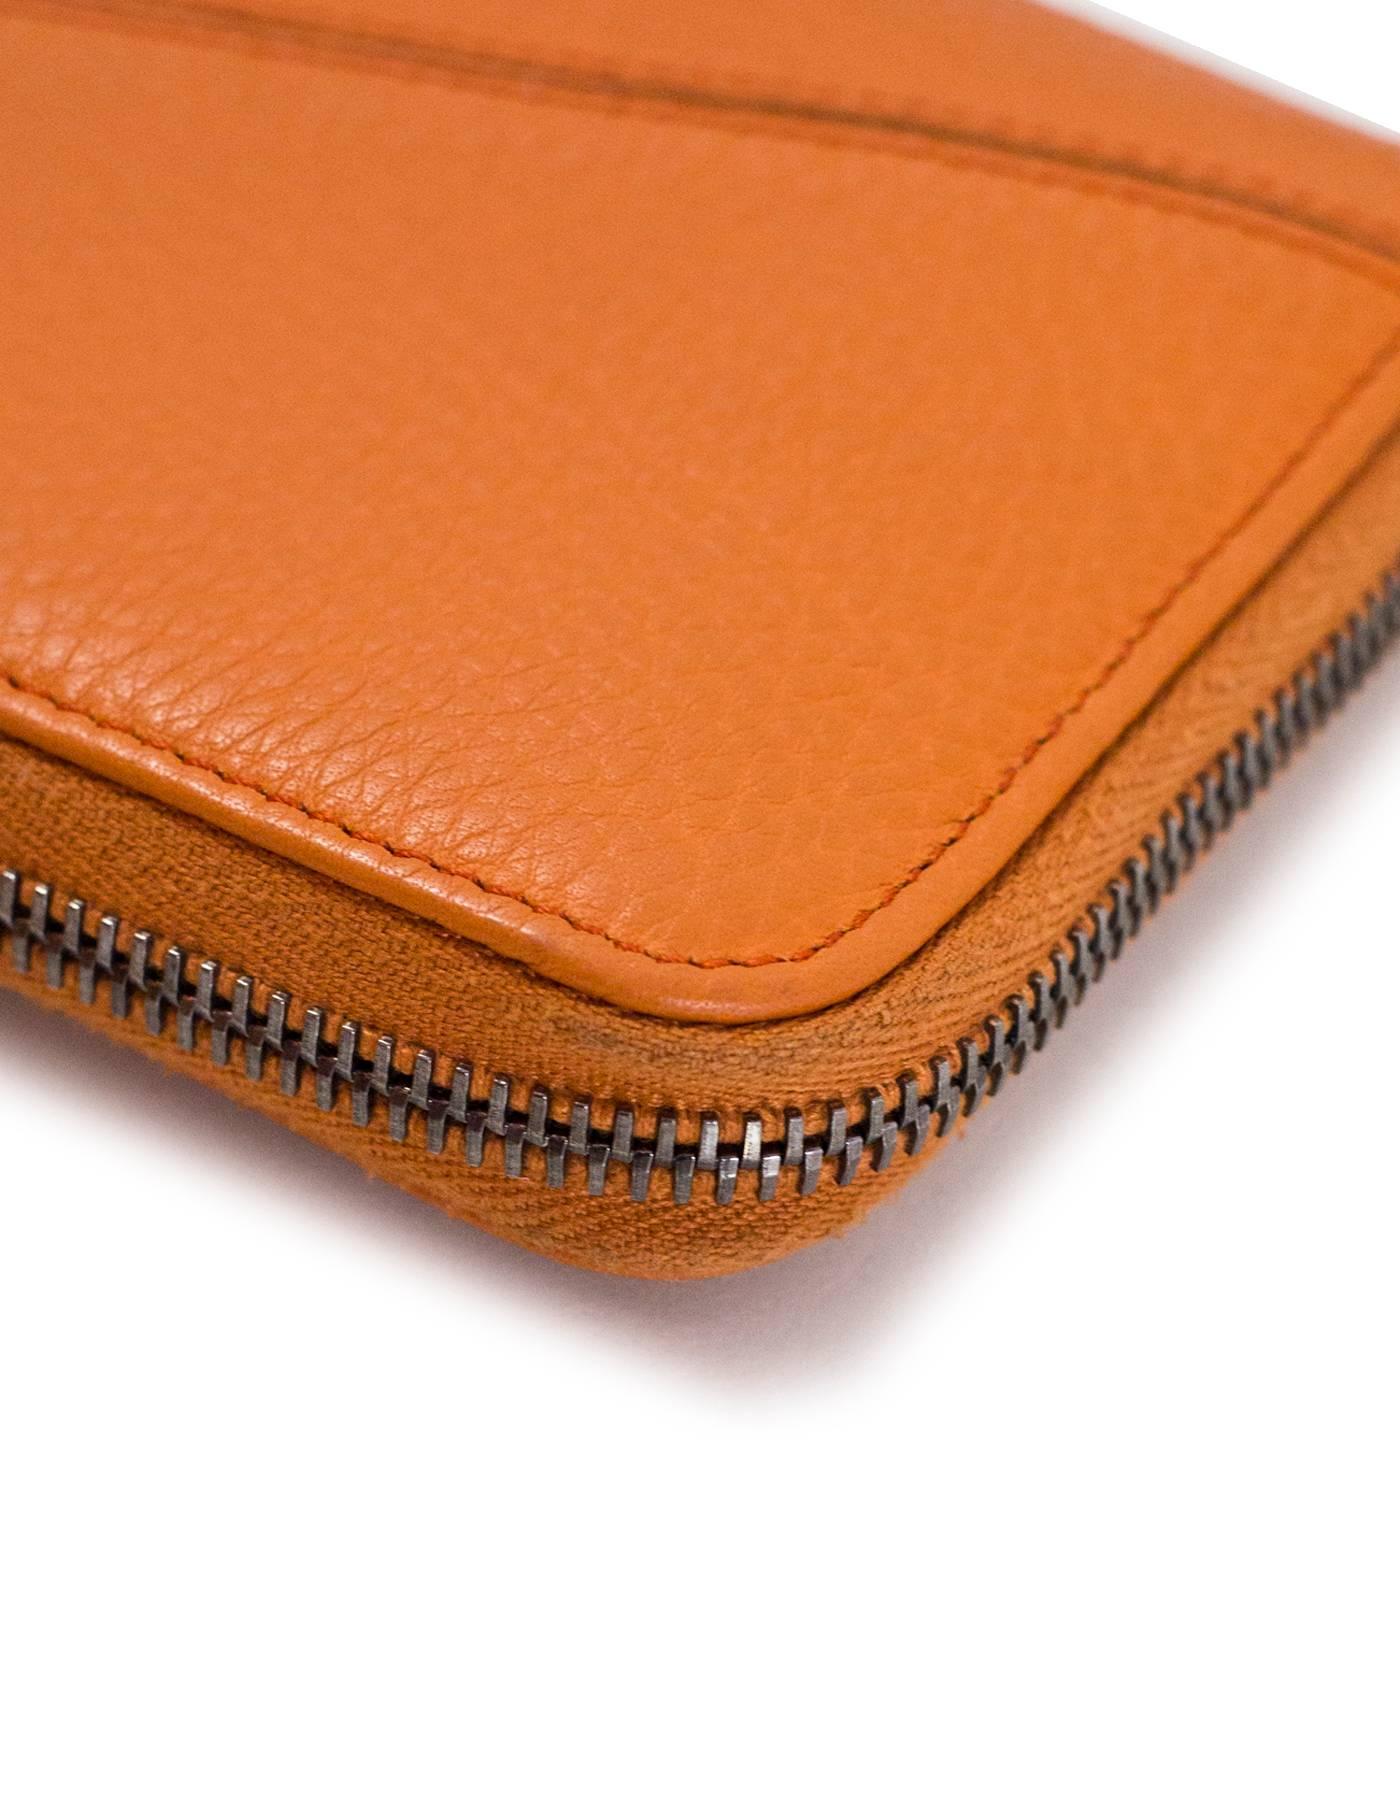 Tod's Orange Leather Zip Around Wallet

Made In: Italy
Color: Orange
Hardware: Silvertone
Materials: Leather, metal
Lining: Orange leather and black textile
Closure/Opening: Zip around closure
Exterior Pockets: None
Interior Pockets: Zip pouch,